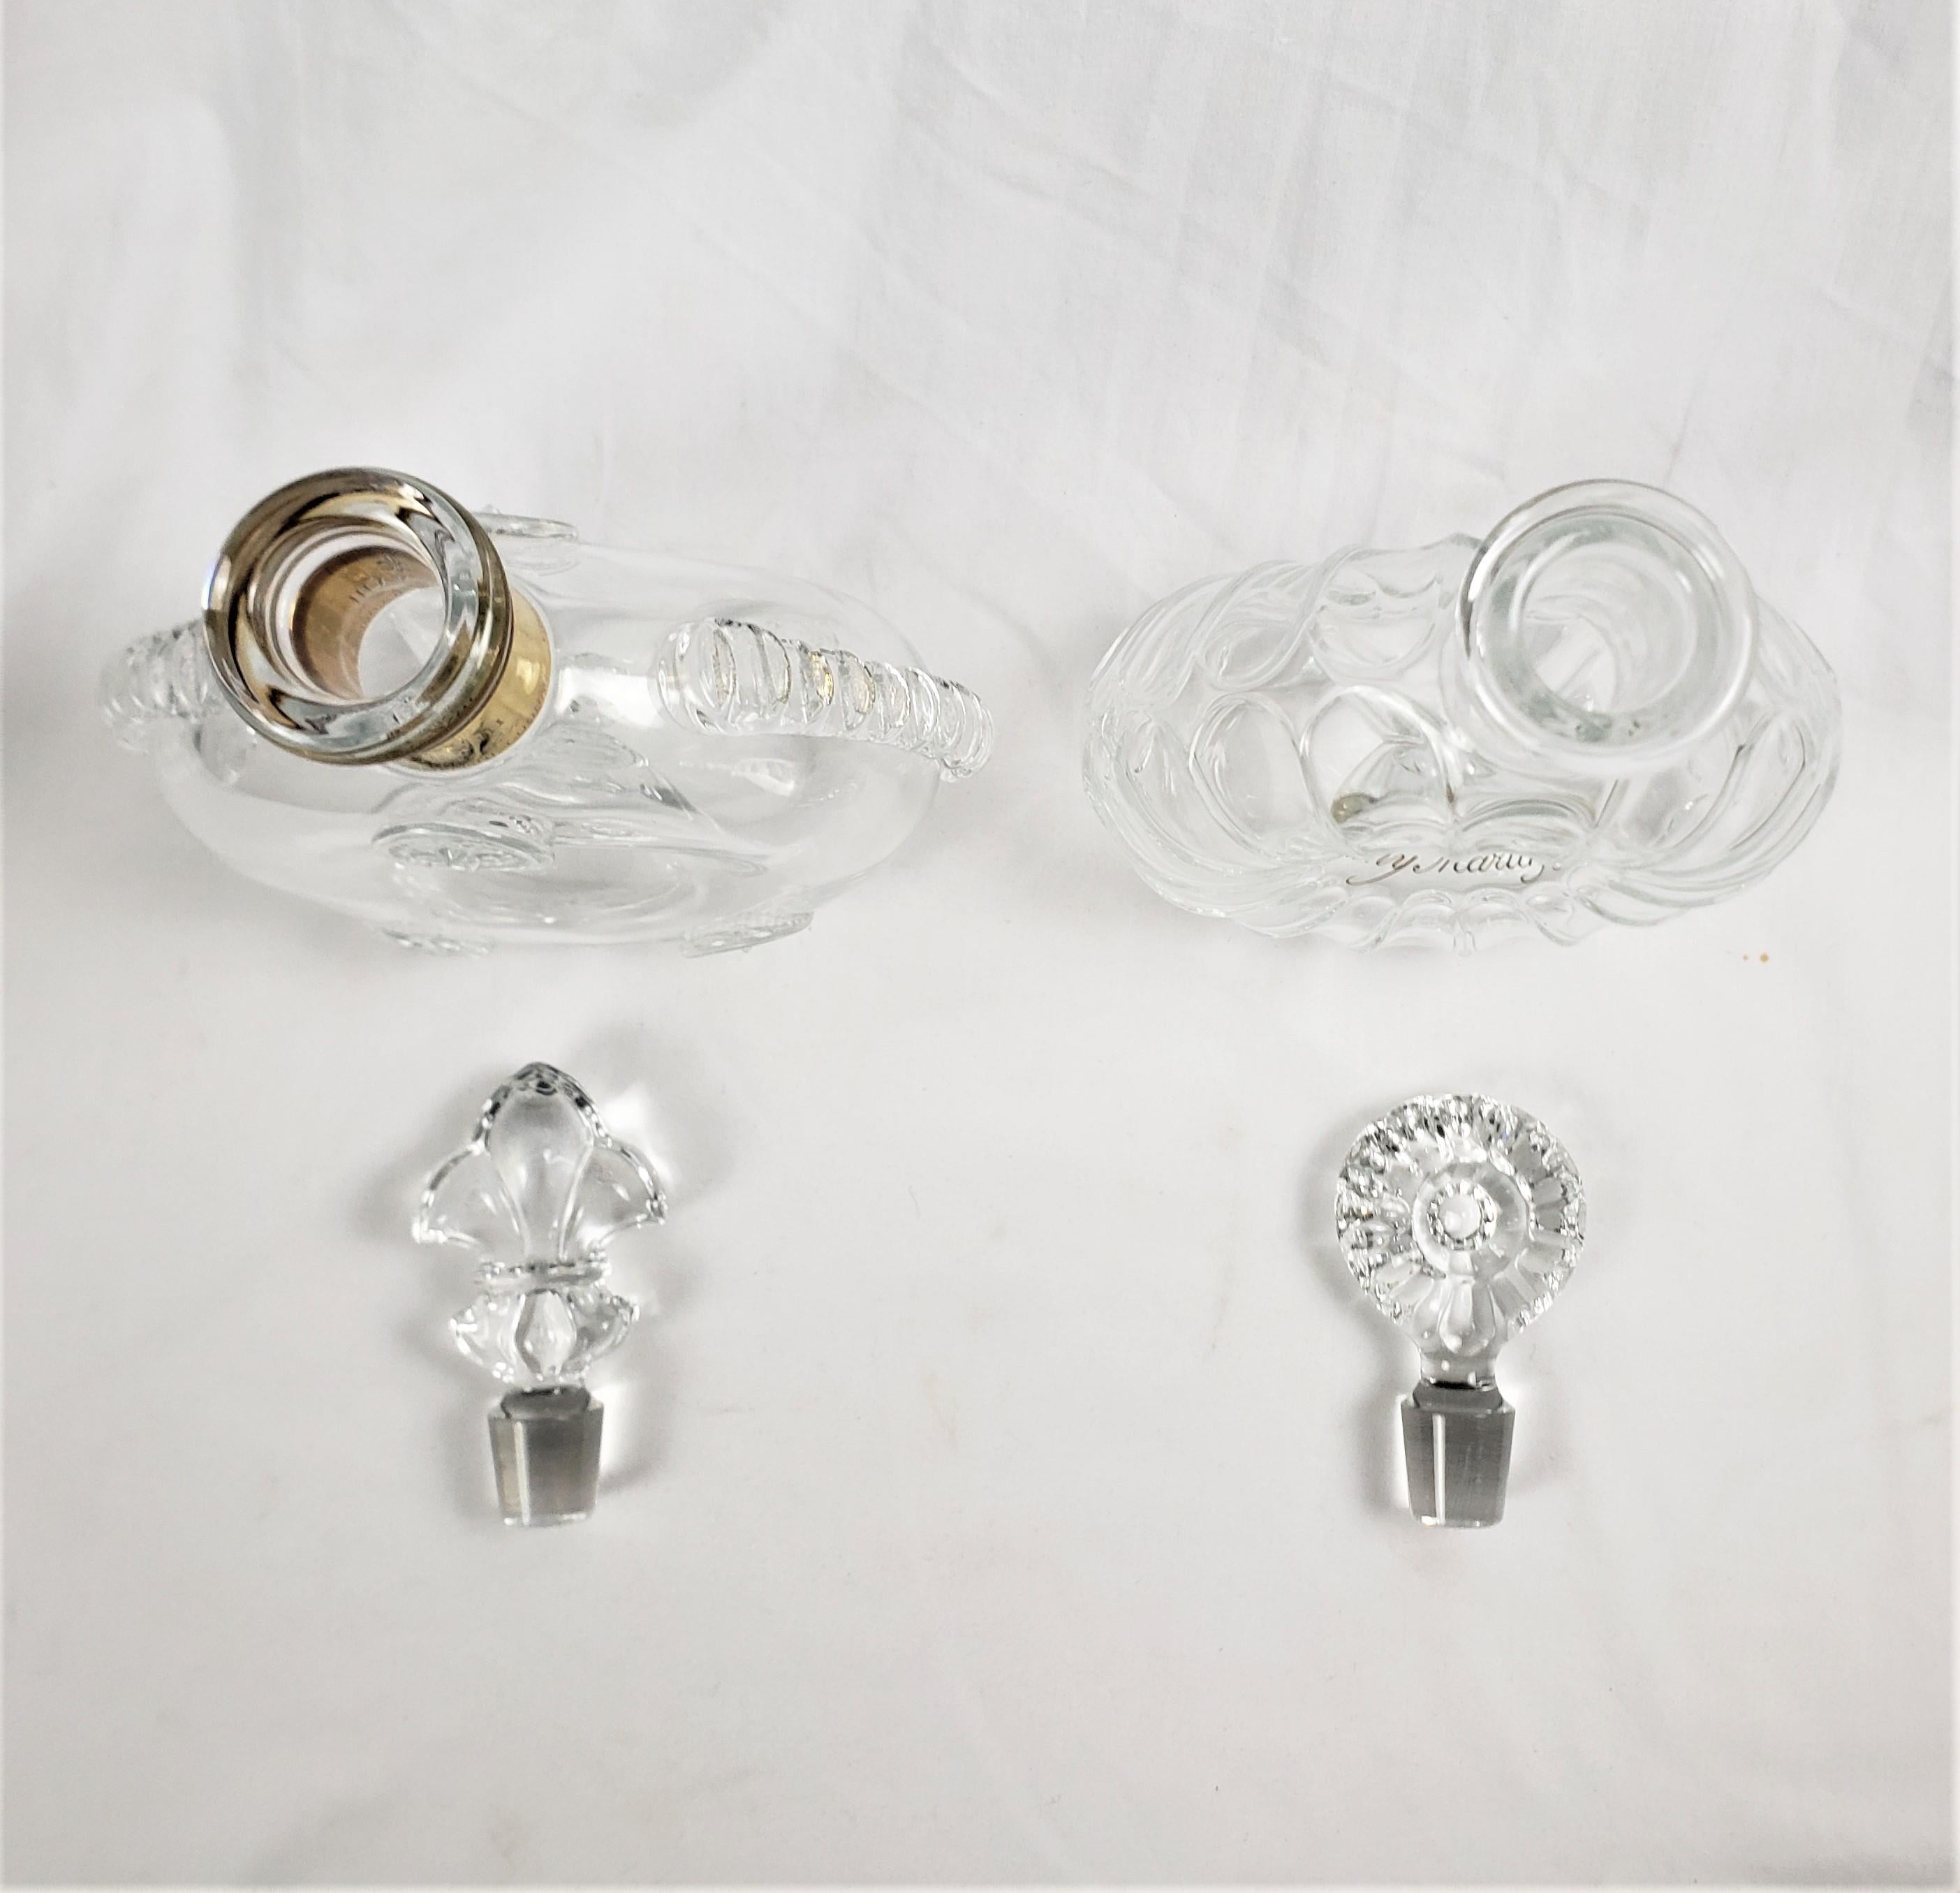 French Pair of Baccarat Crystal Mid-Century Remy Martin Liquor Bottles or Decanters For Sale